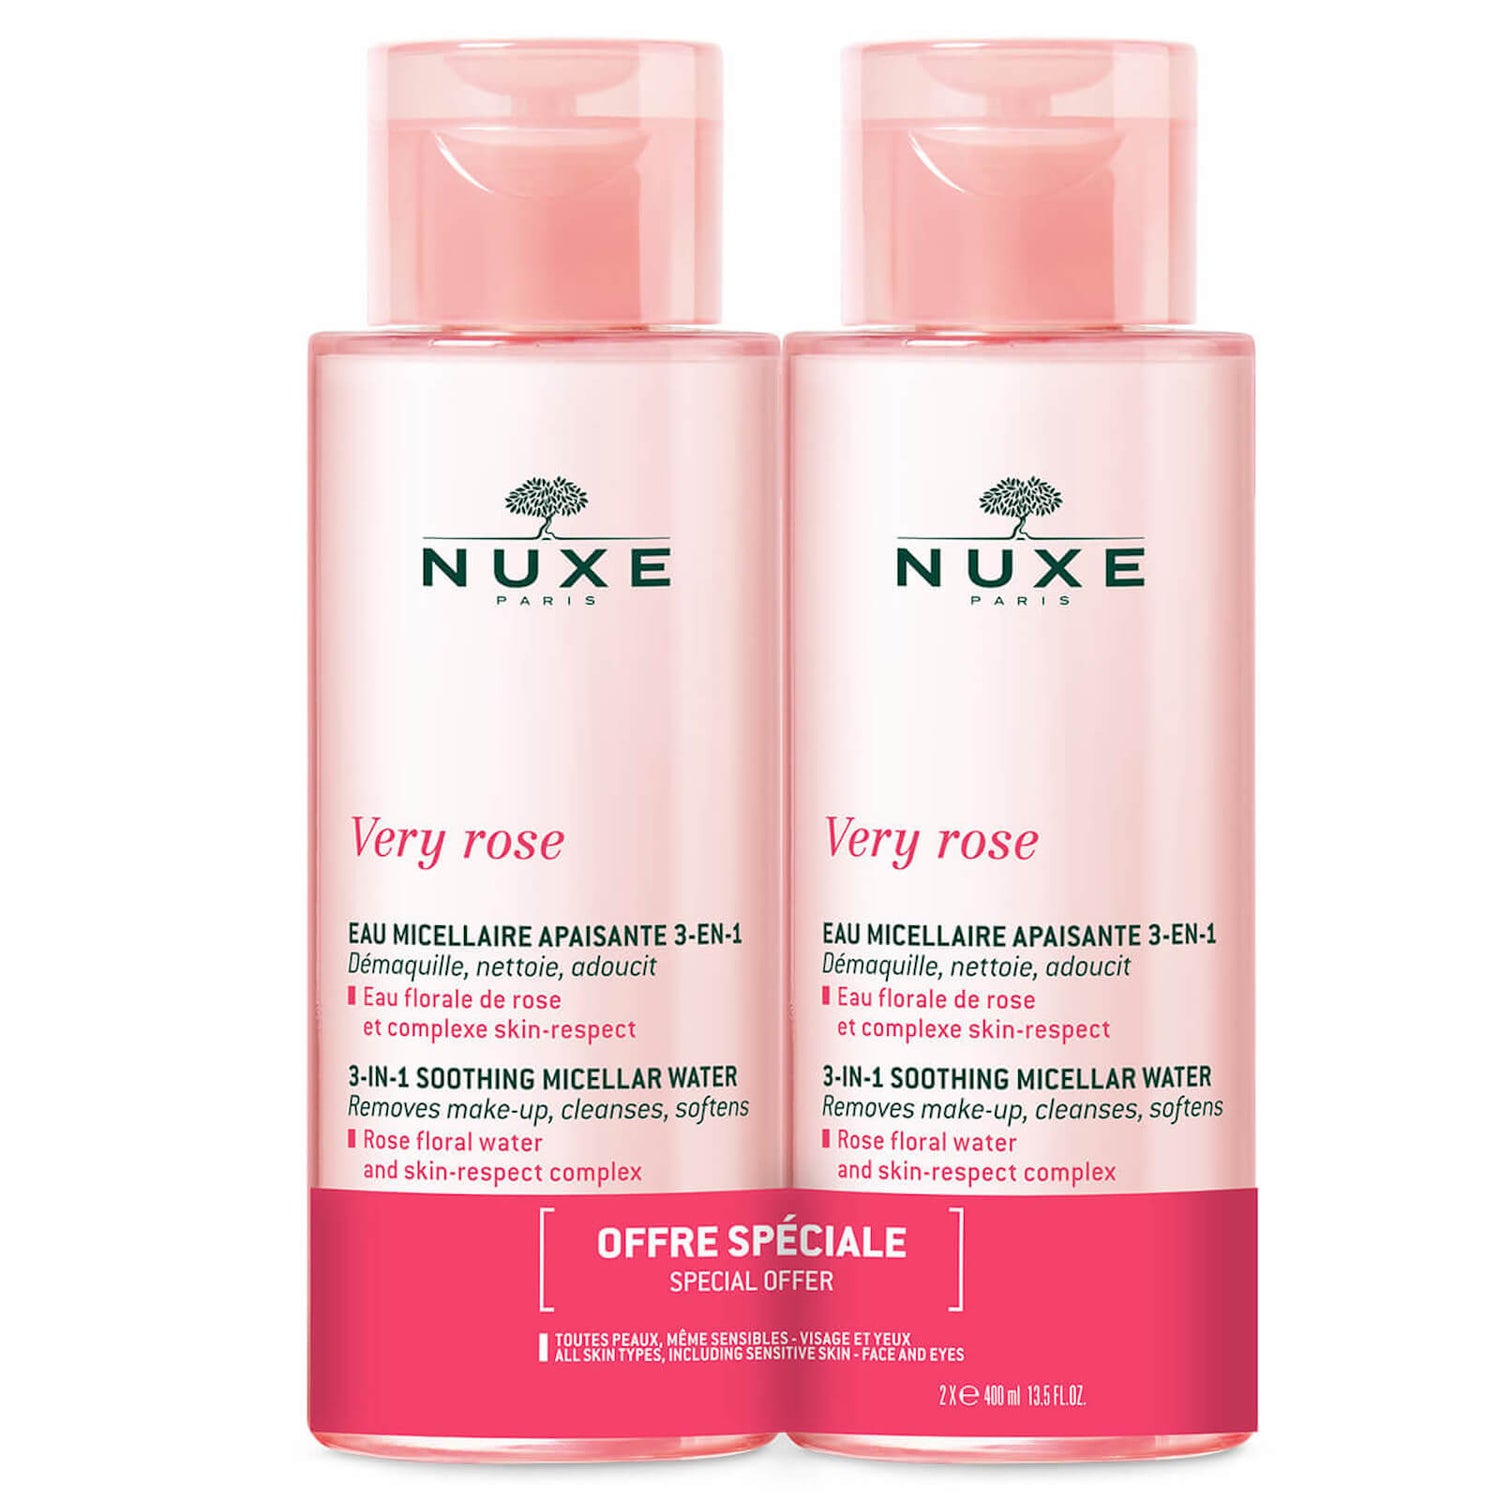 NUXE Very Rose 3-in-1 Soothing Micellar Water Duo 2 x 400 ml